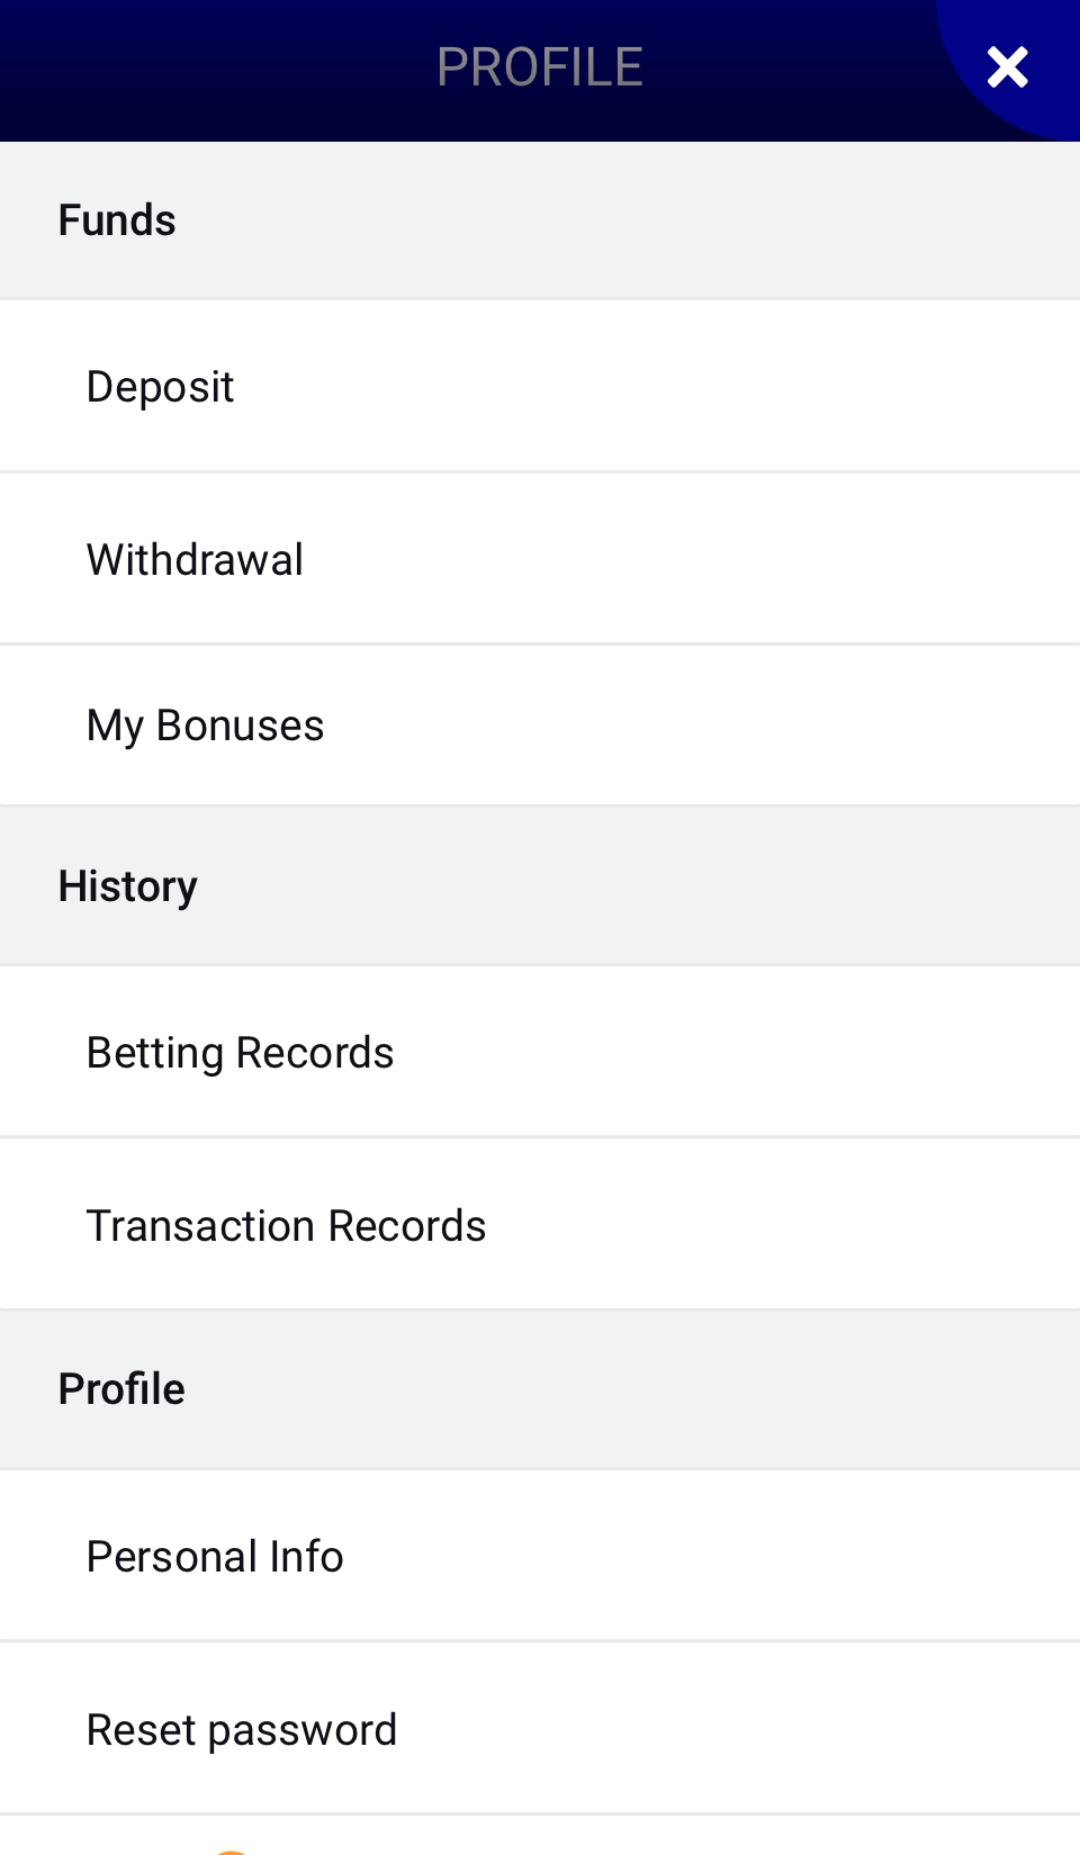 Screenshot of the Profile section in the ICCWIN app